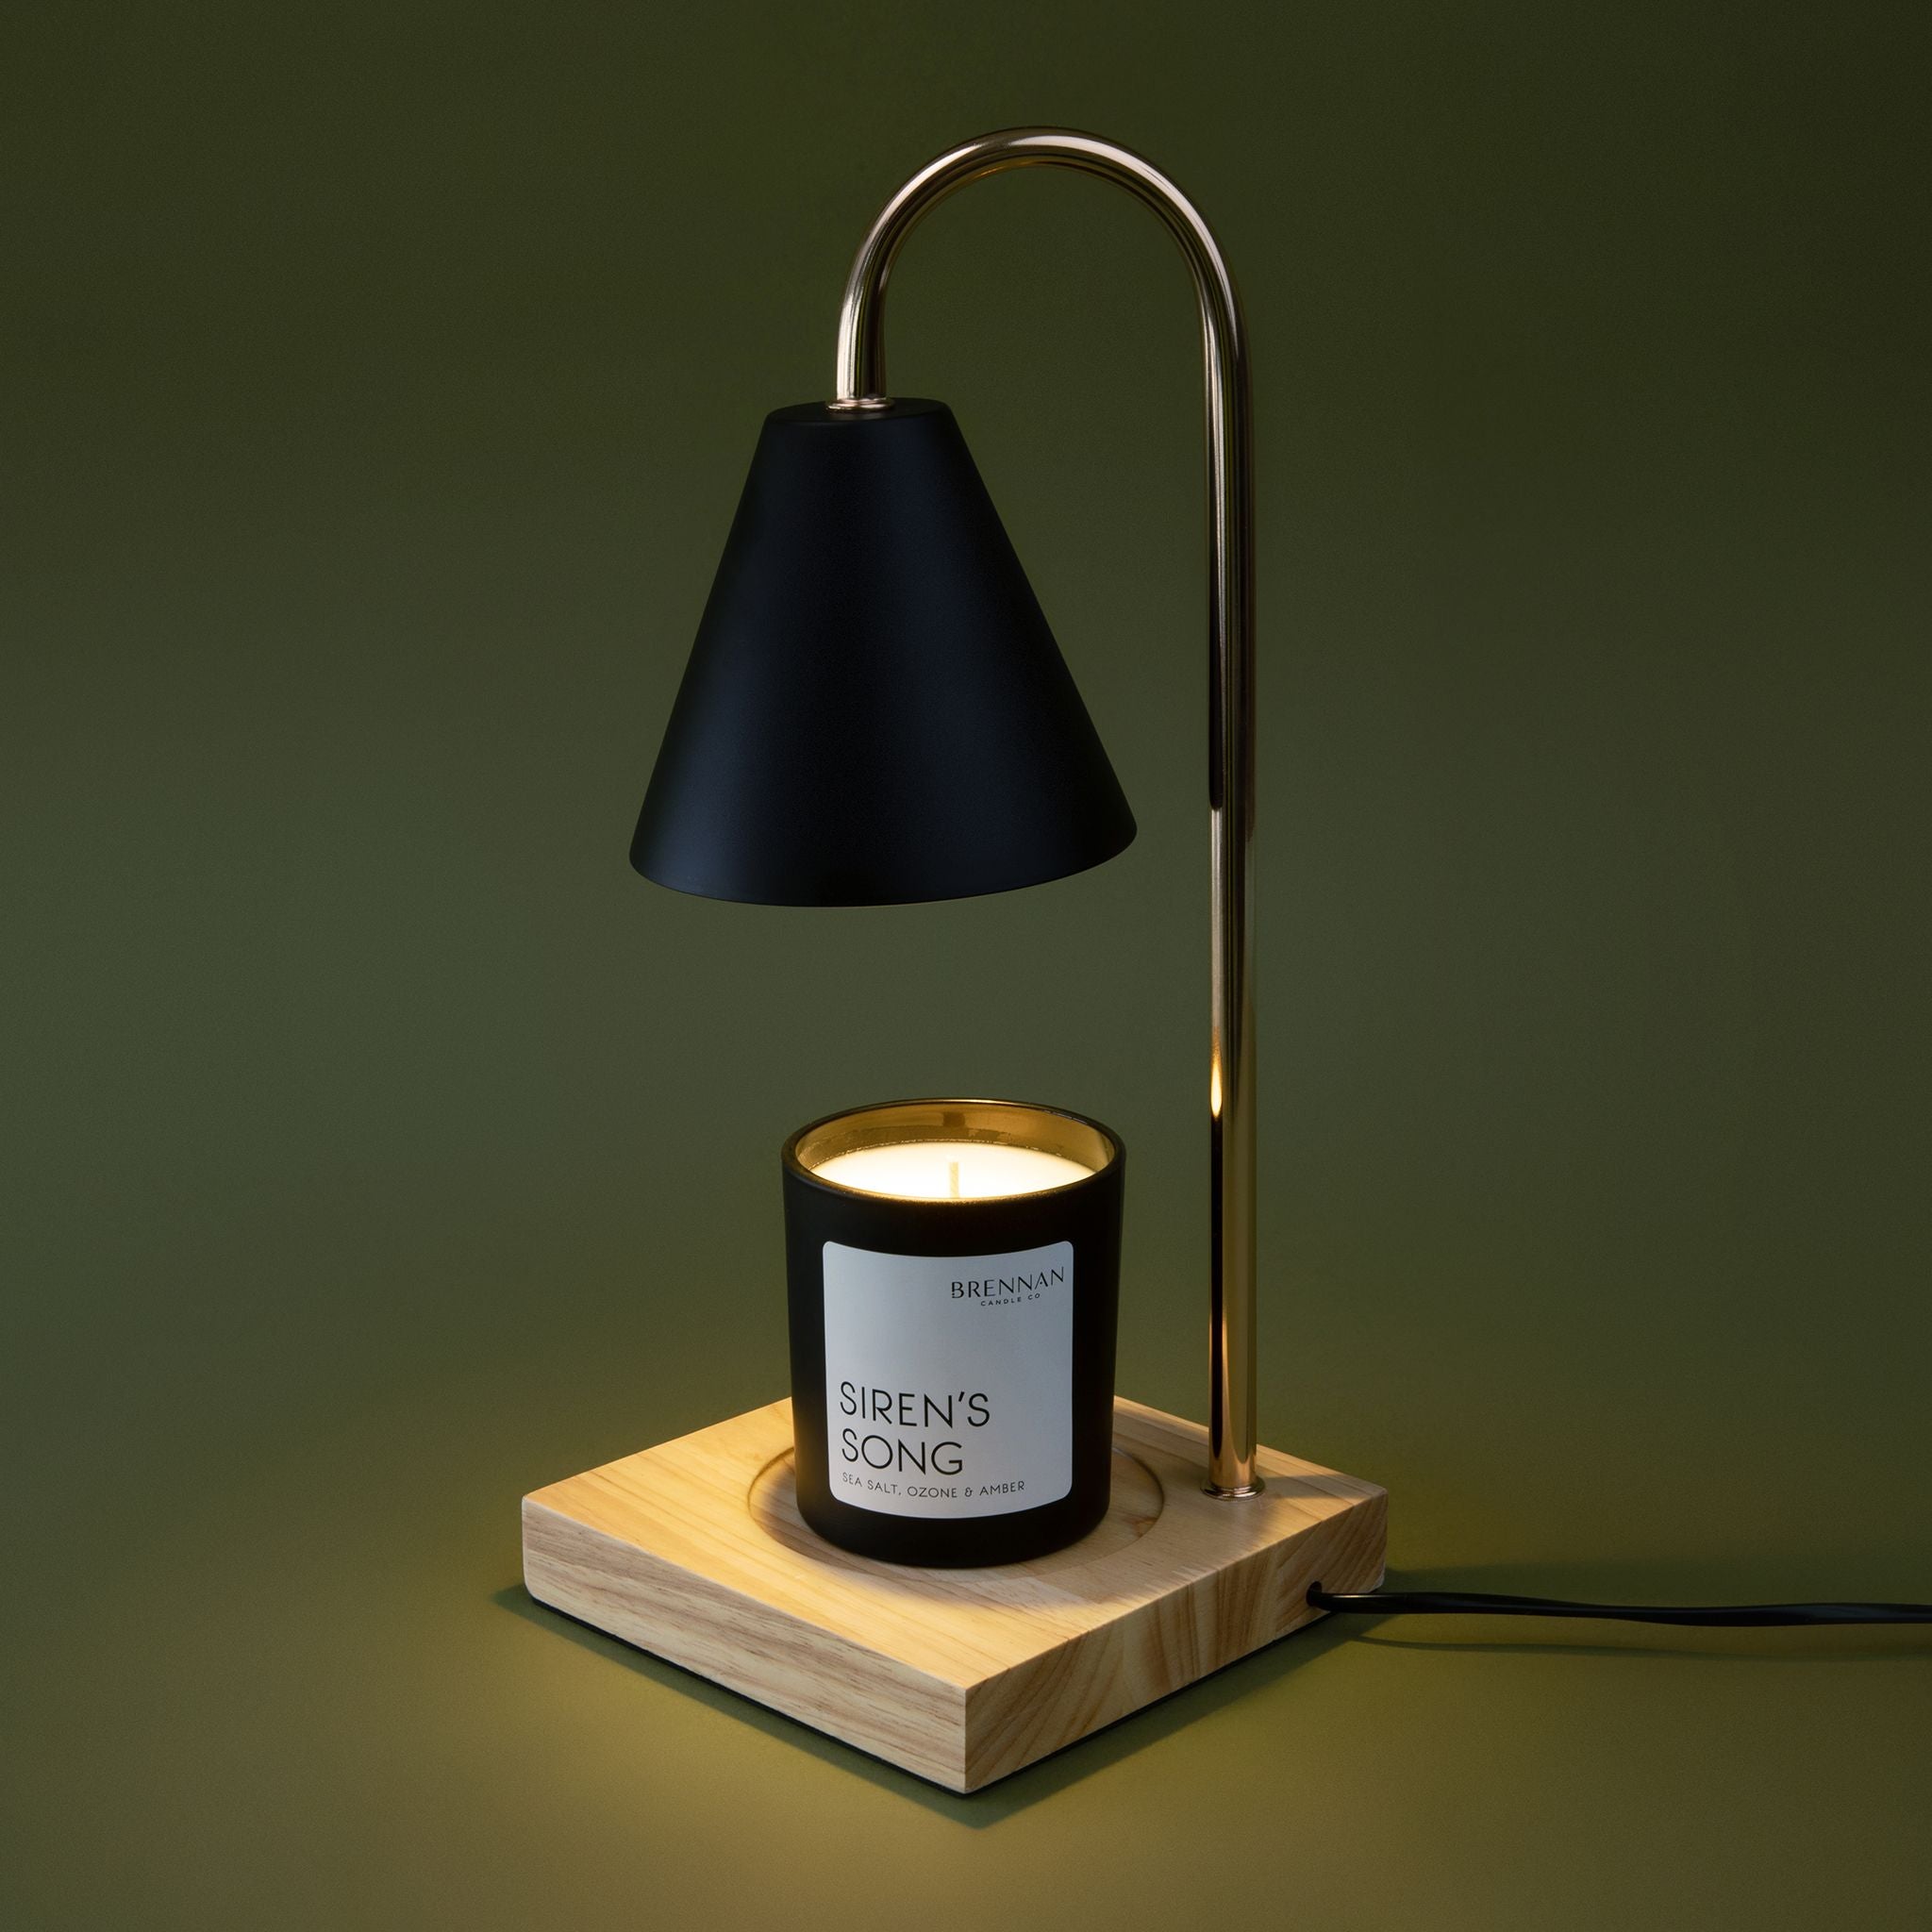 Candle Warming Lamp